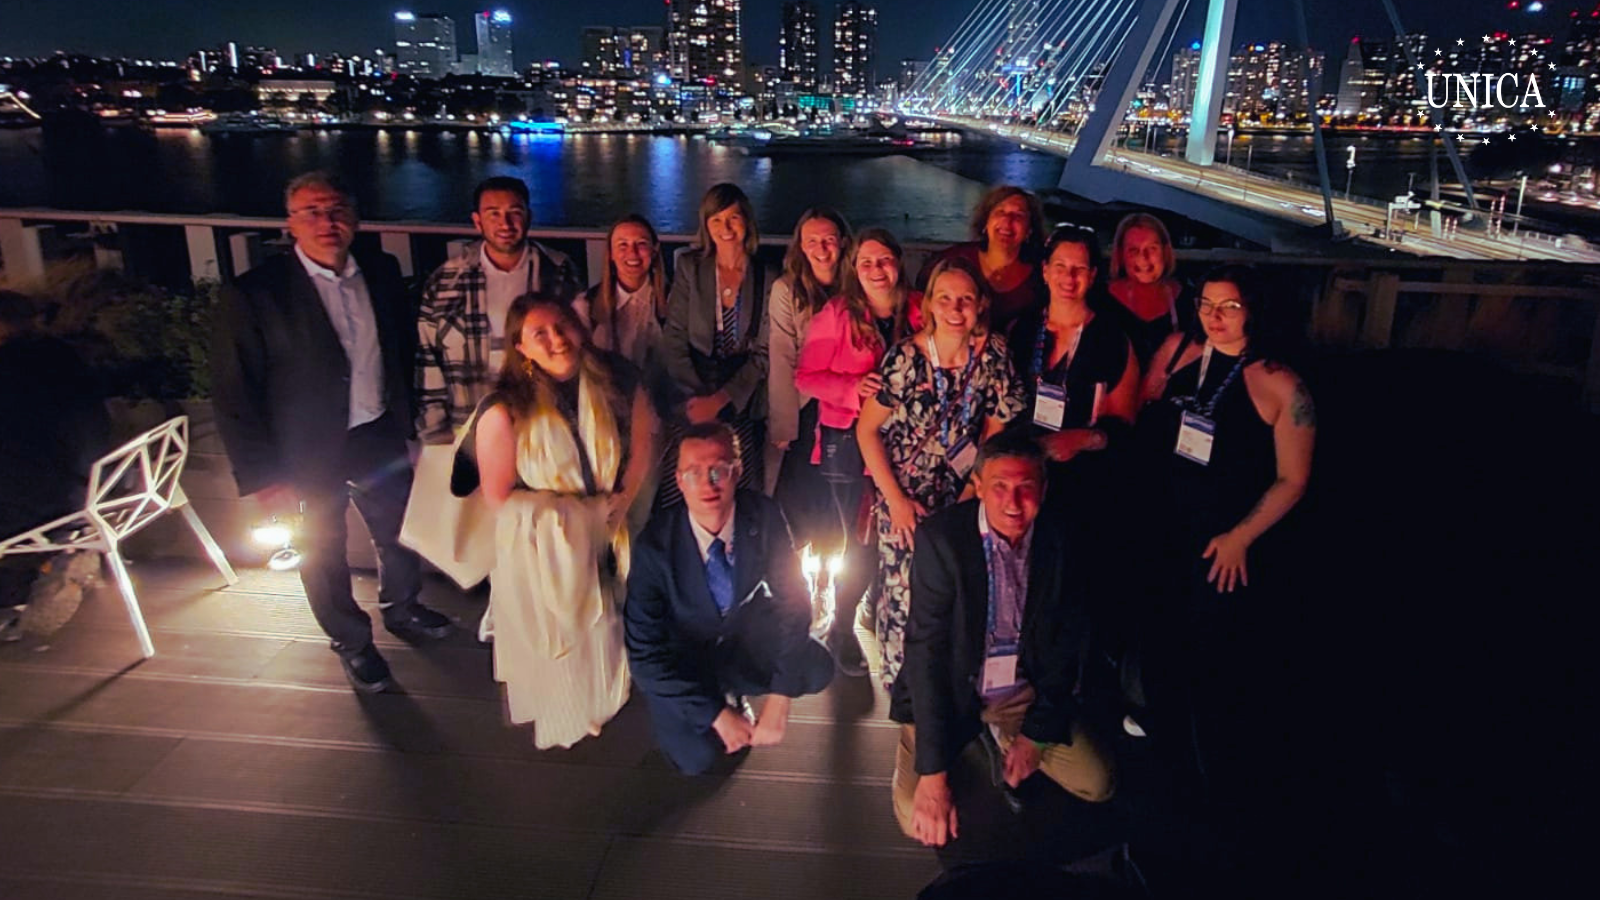 Group of 14 people posing for a picture at night with the Erasmus bridge in Rotterdam in the background